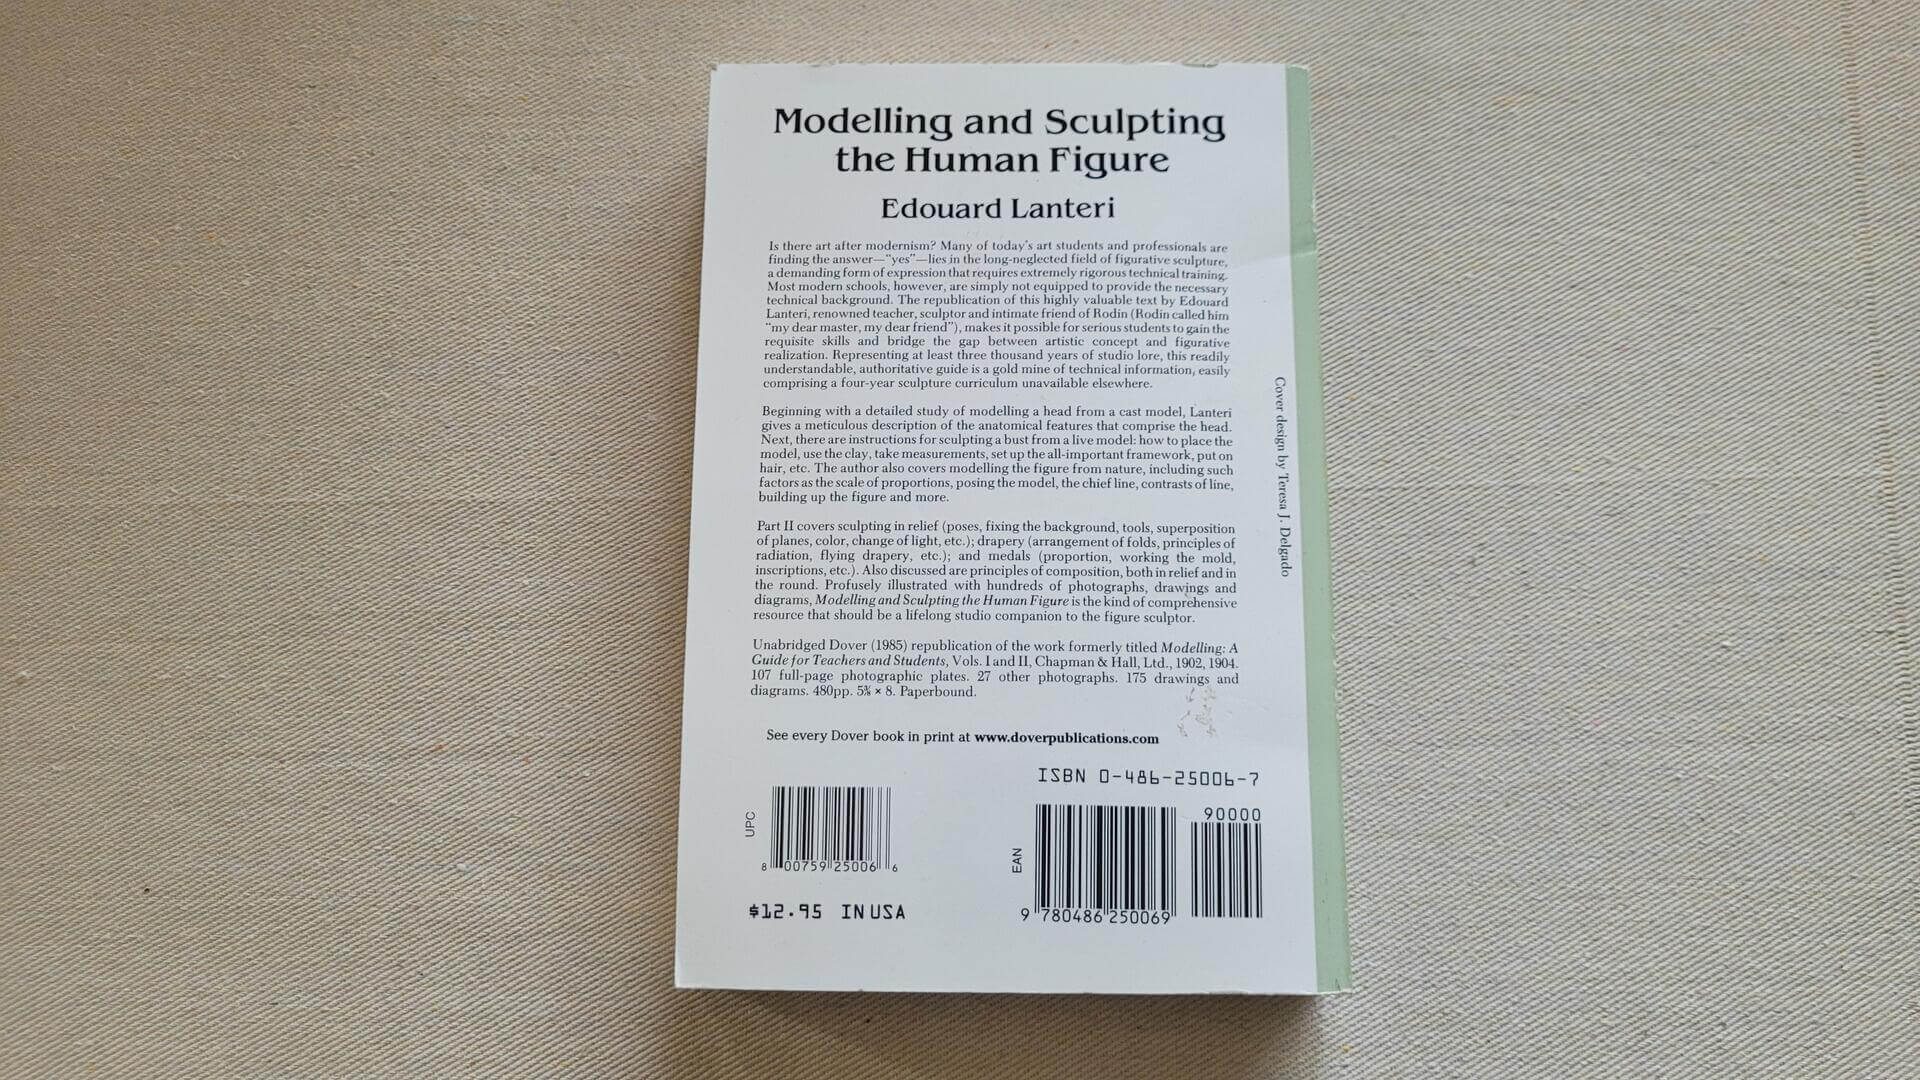 Modelling and Sculpting the Human Figurebook by Édouard Lantéri‎ Dover Publications; Revised edition 1985 ISBN-10: ‎ 0486250067 ISBN-13: ‎ 978-0486250069